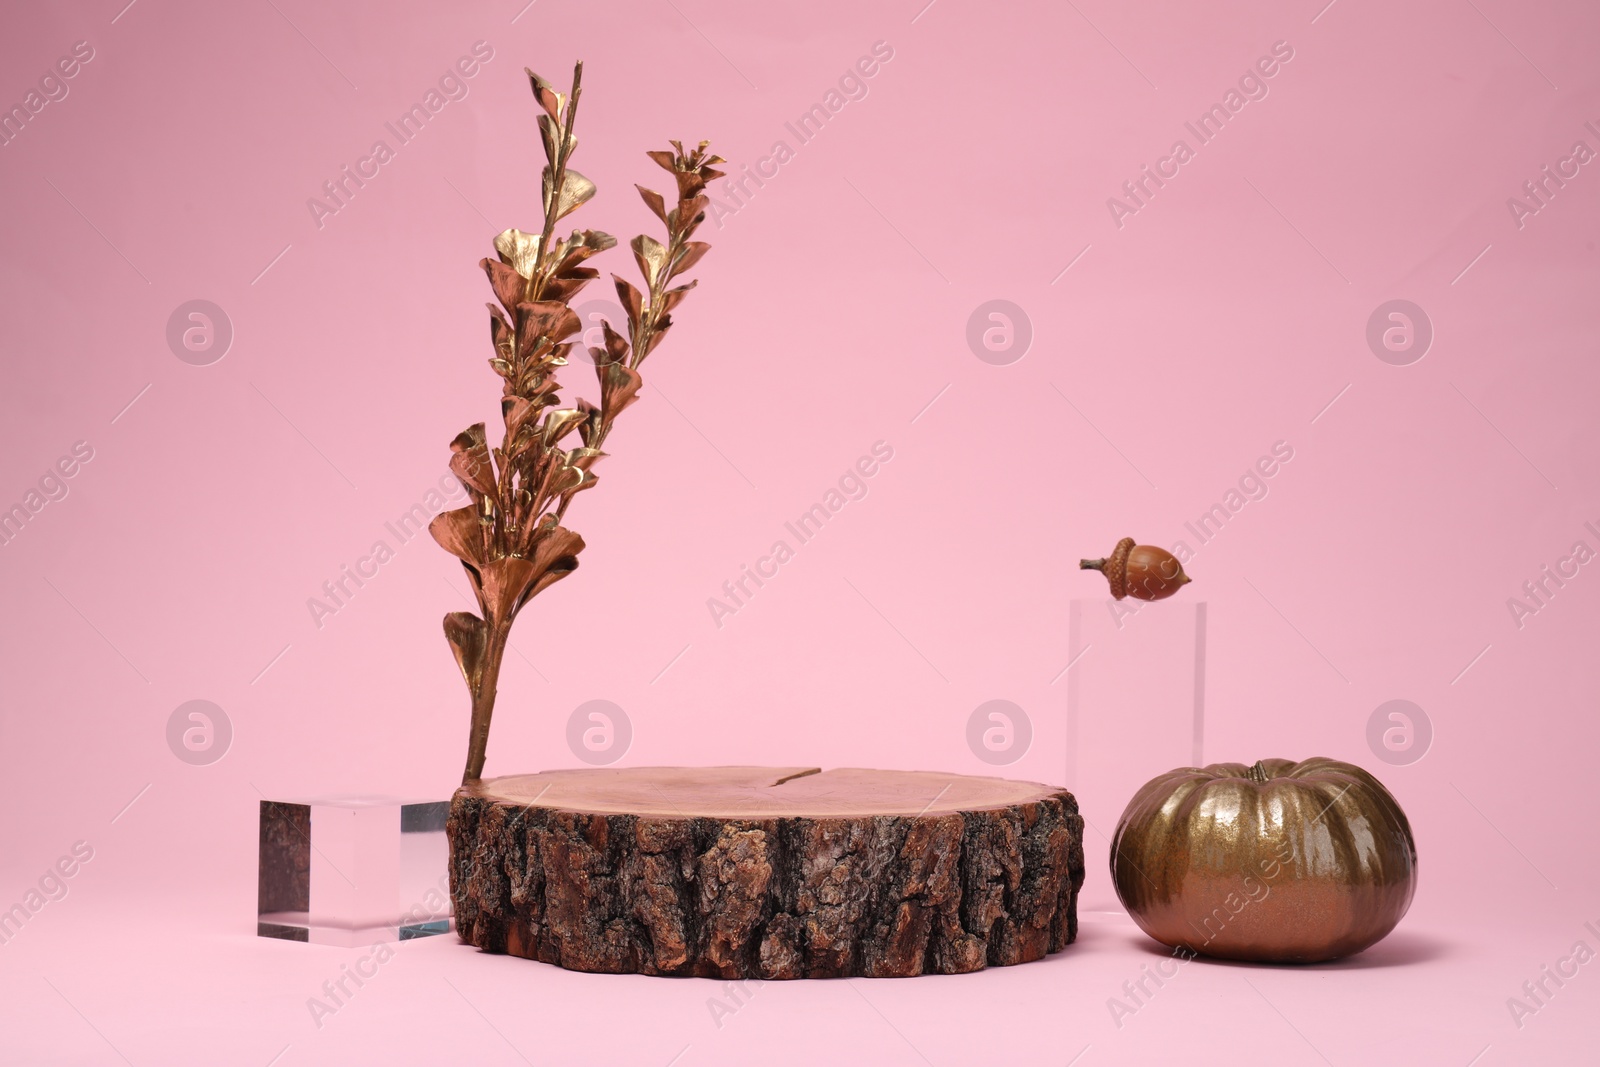 Photo of Stylish presentation for product. Wooden stump, geometric figures and autumn decor on pink background